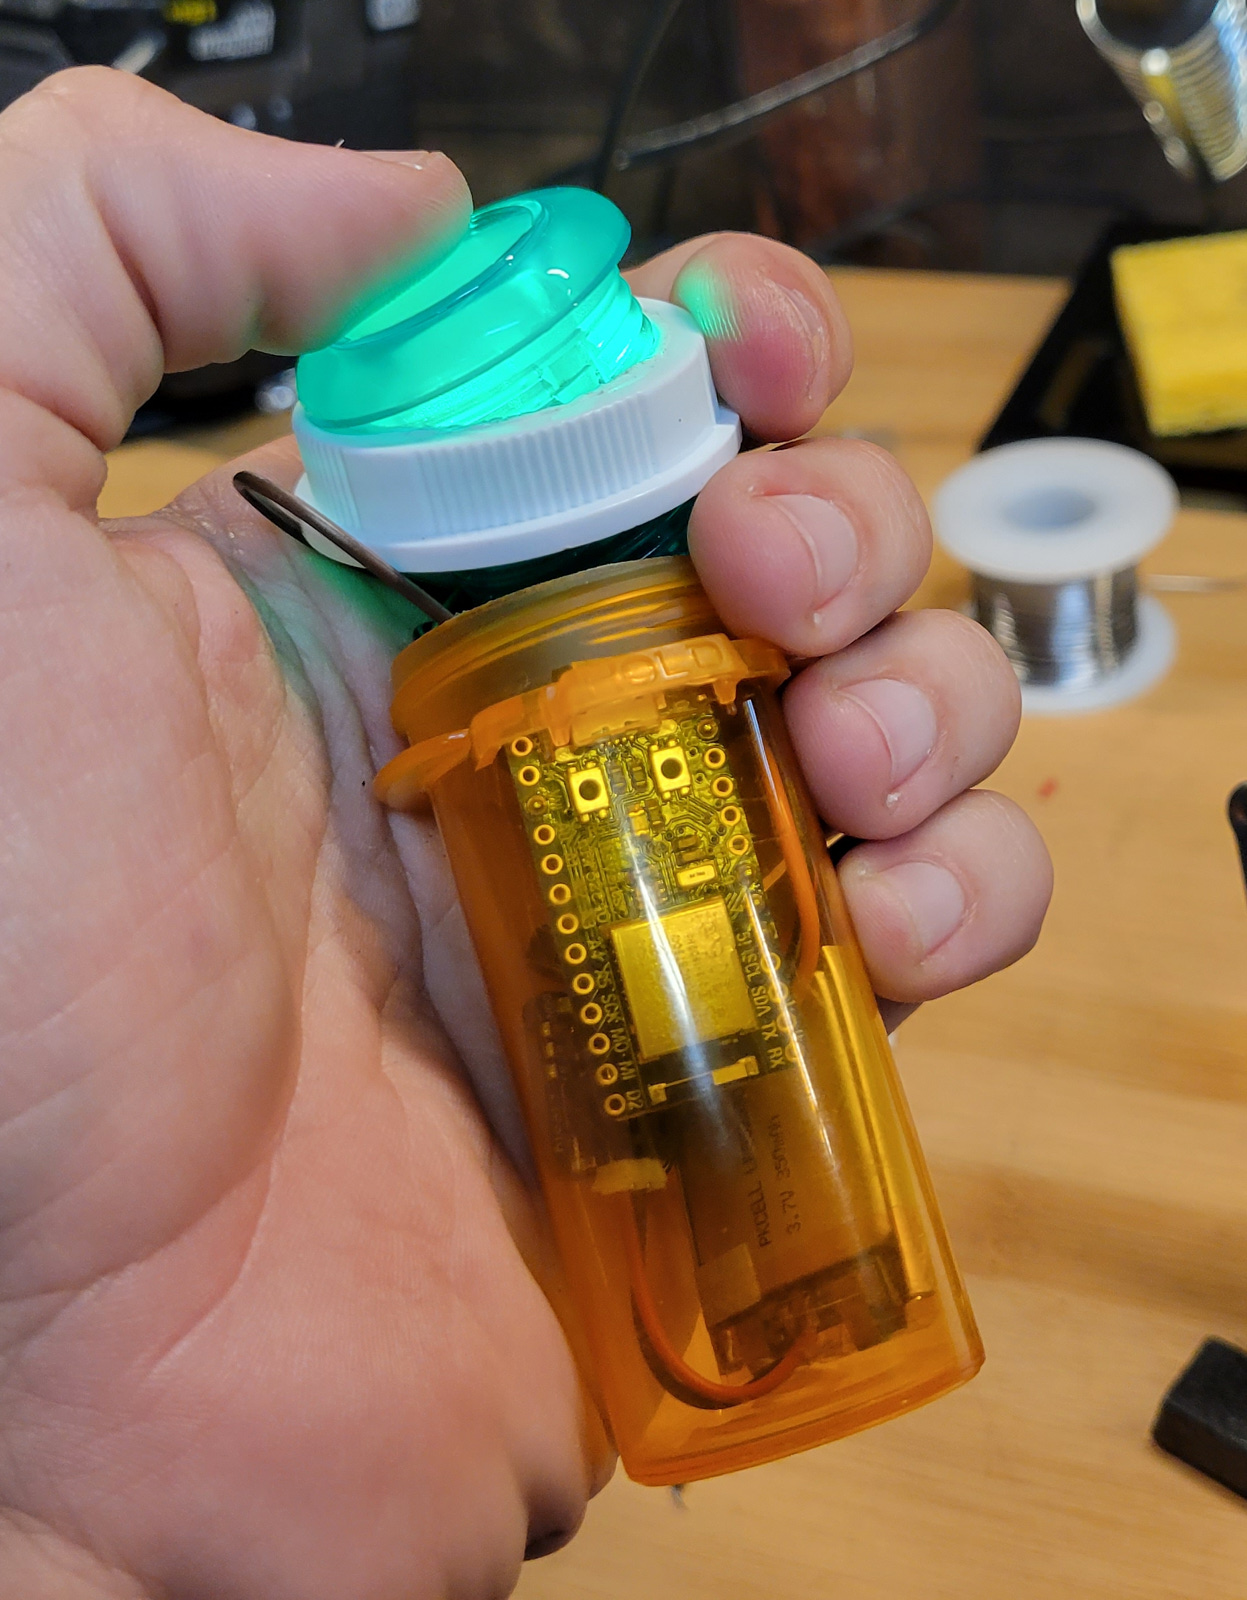 Sliding the circuit board and button through the top of hole in the lid and into the bottle.